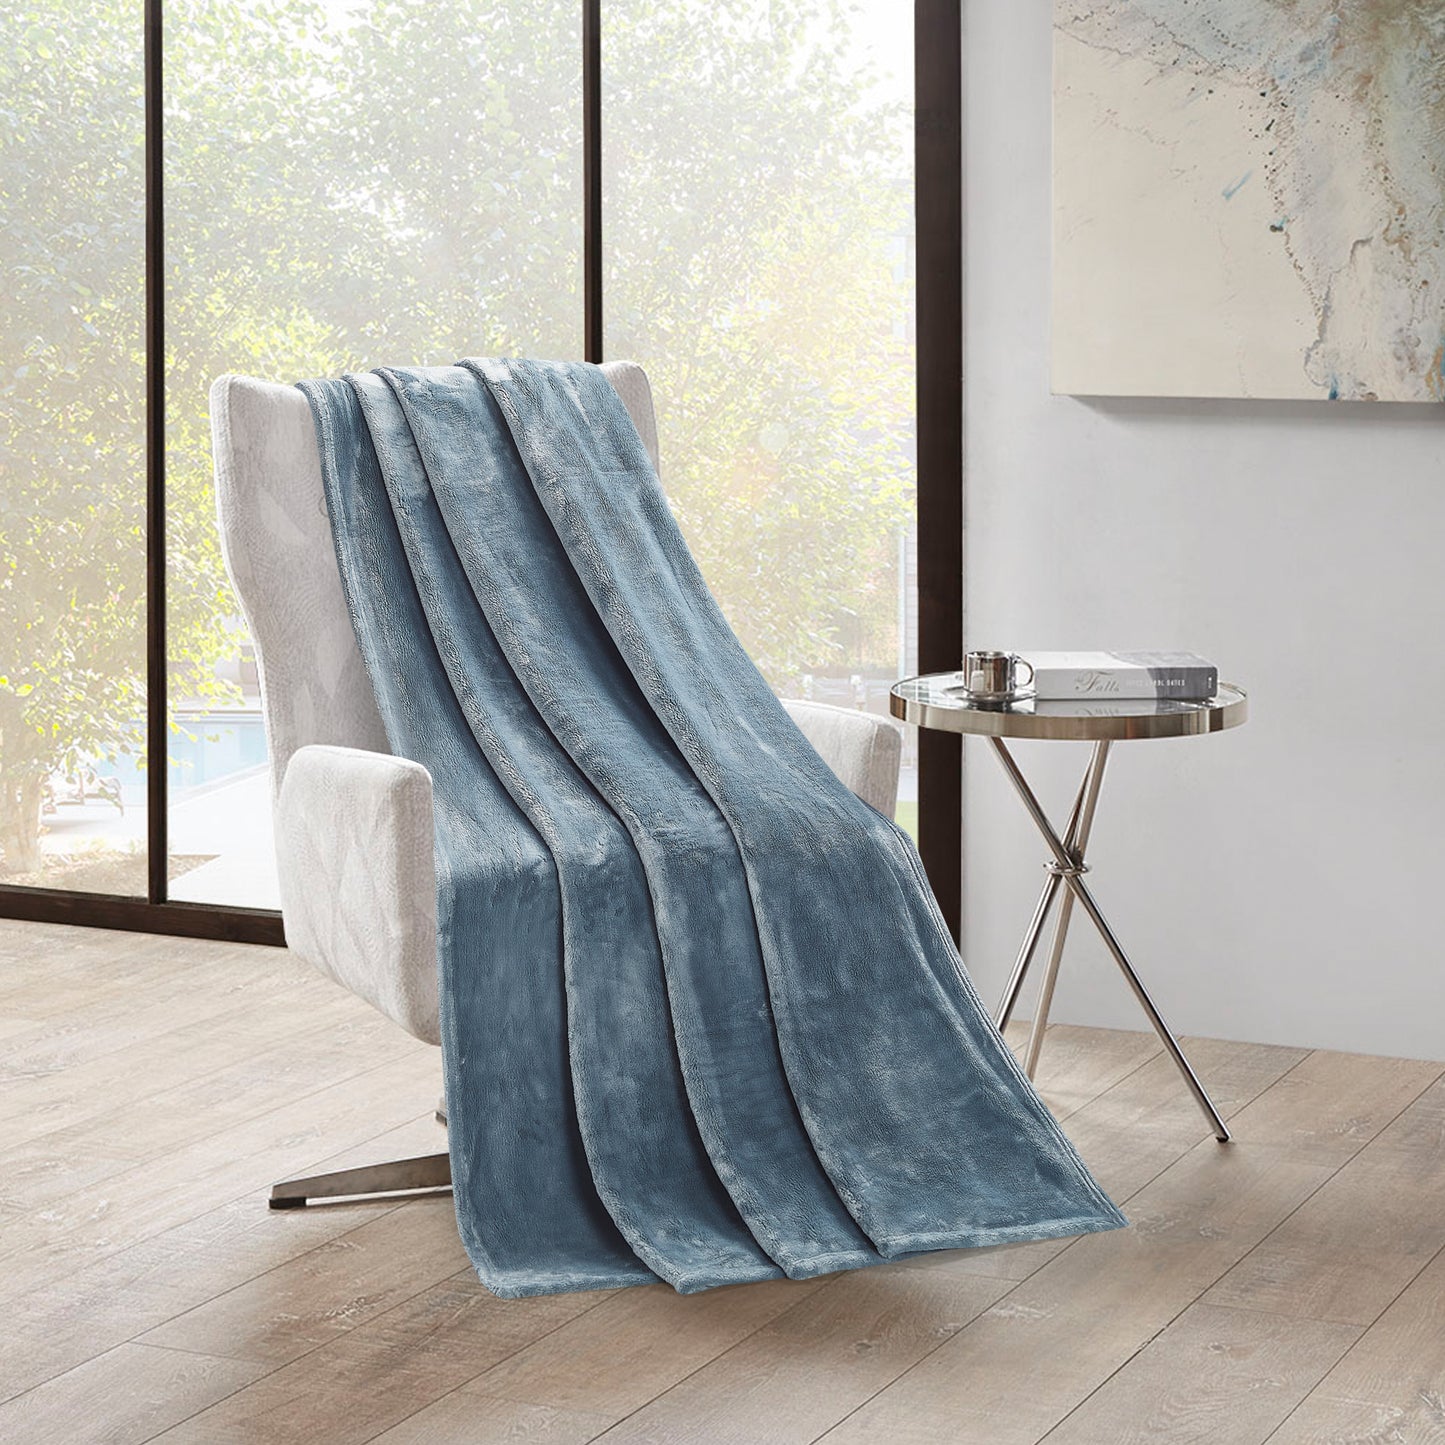 500 Series Solid Ultra Plush Blanket - Silver Sage